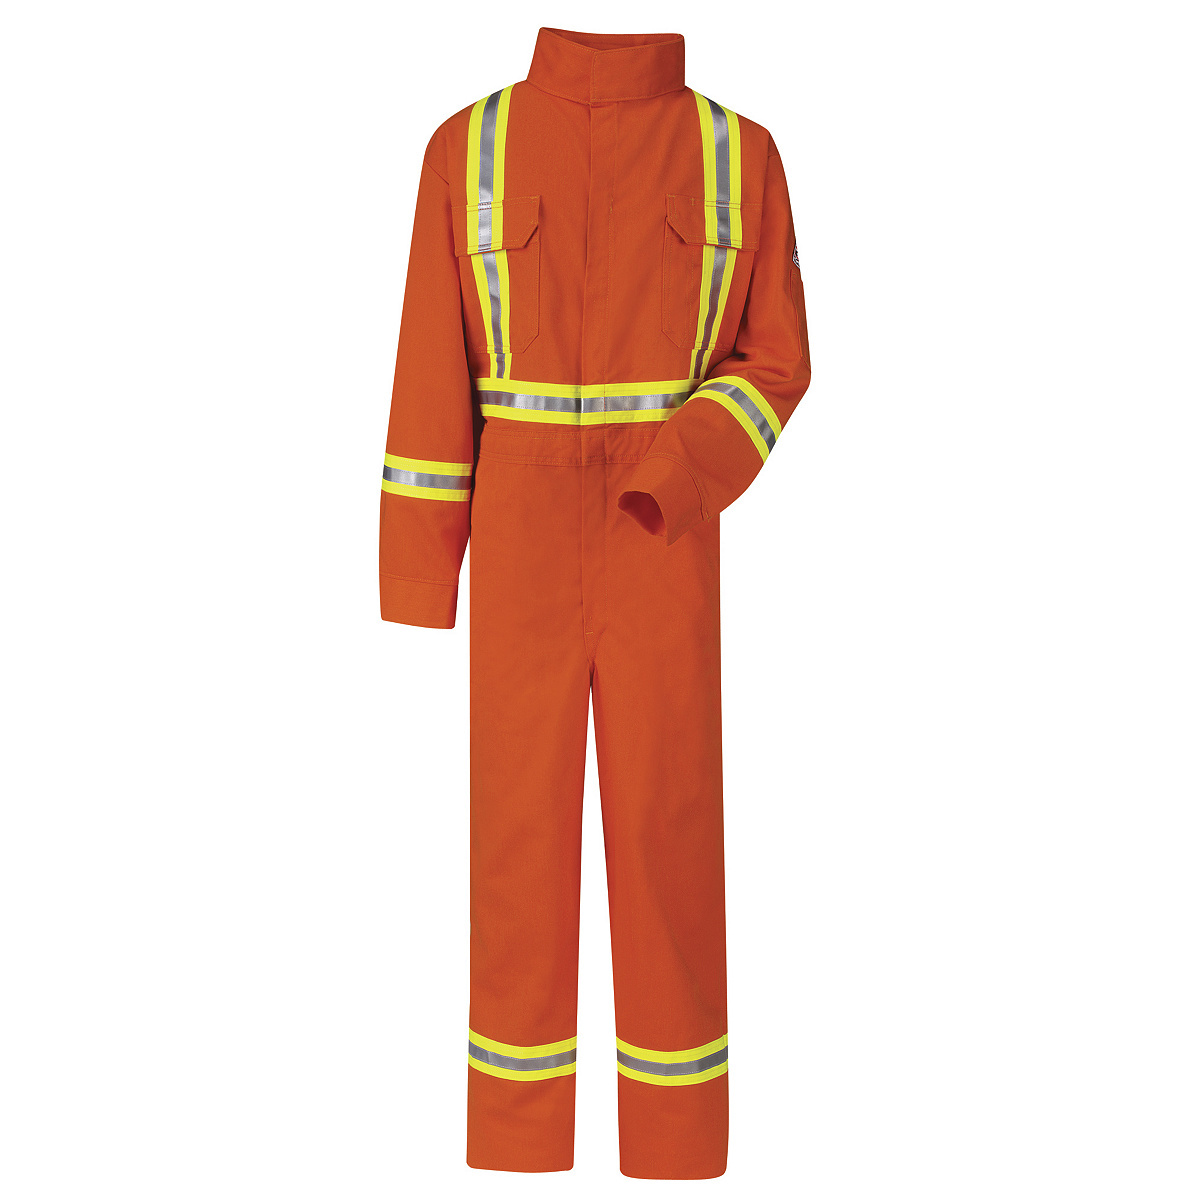 Bulwark® 56 Tall Orange Westex Ultrasoft® Twill/Cotton/Nylon Flame Resistant Coveralls With Zipper Front Closure And Reflective